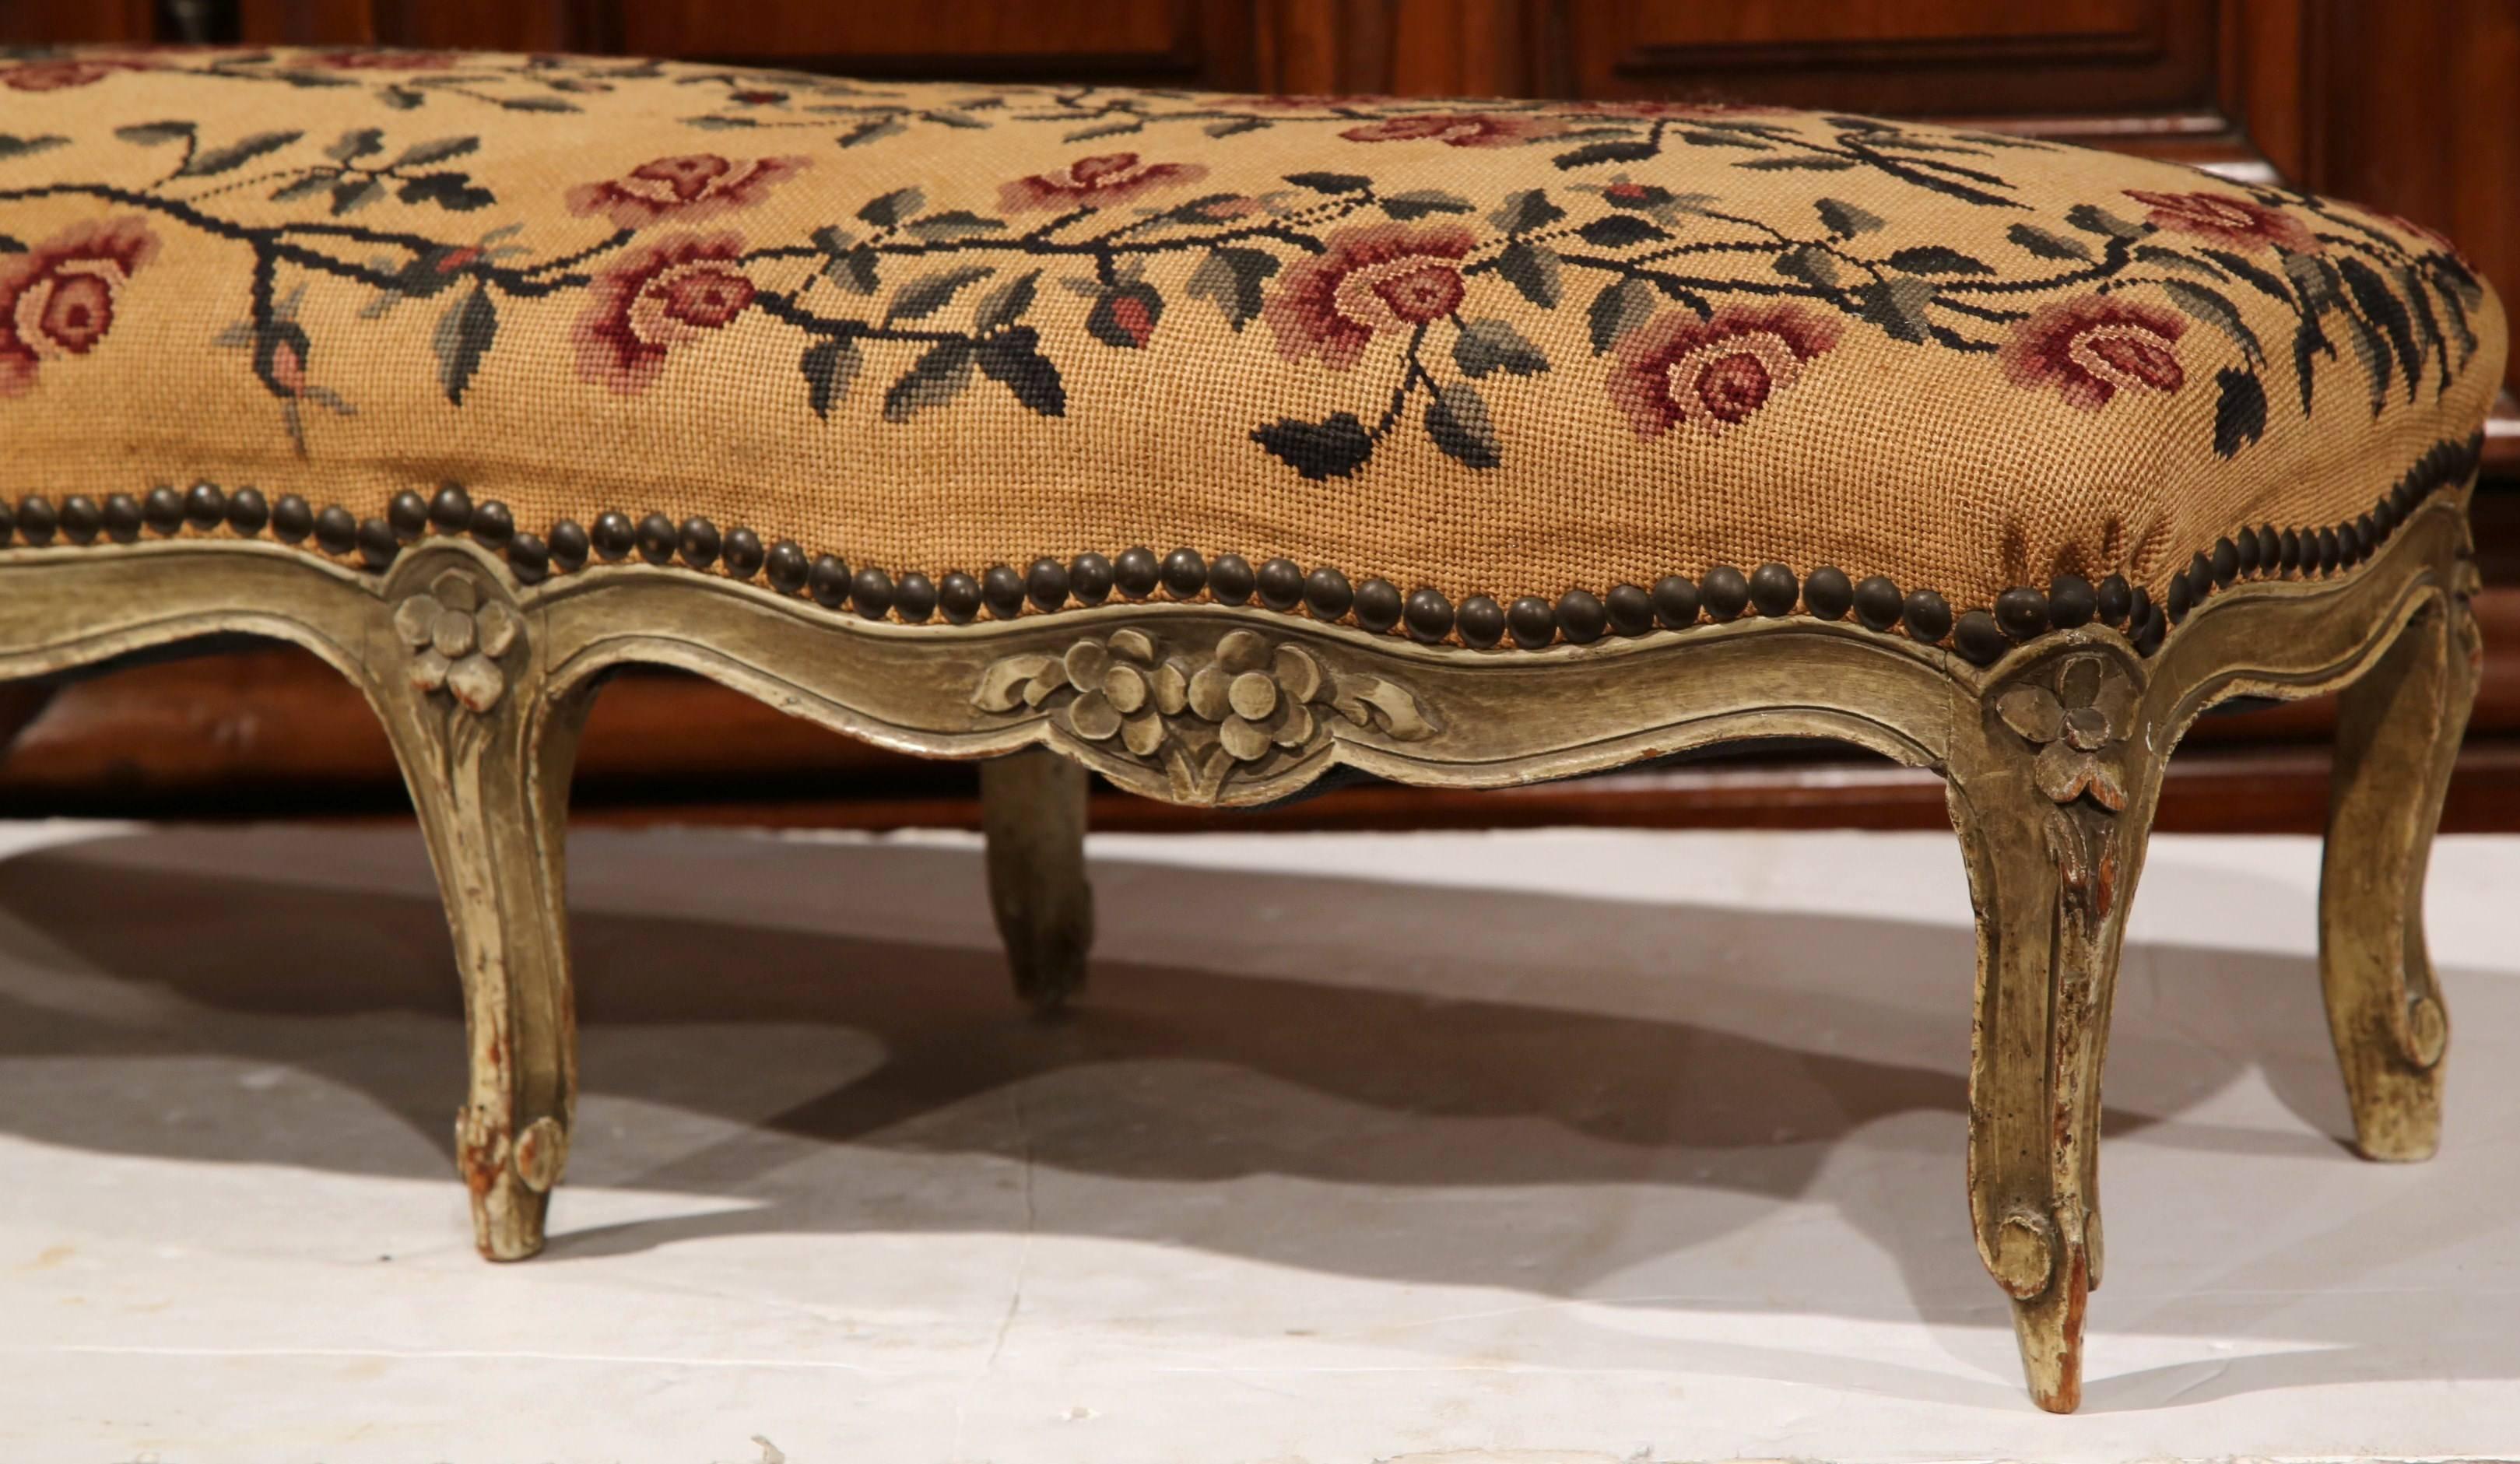 Beautify an entryway, hallway or formal living room with this elegant six-leg foot stool. Crafted in France, circa 1870, the stool features handwoven floral needlepoint, a hand-carved apron and cabriole legs. The tapestry on the seat is a soft